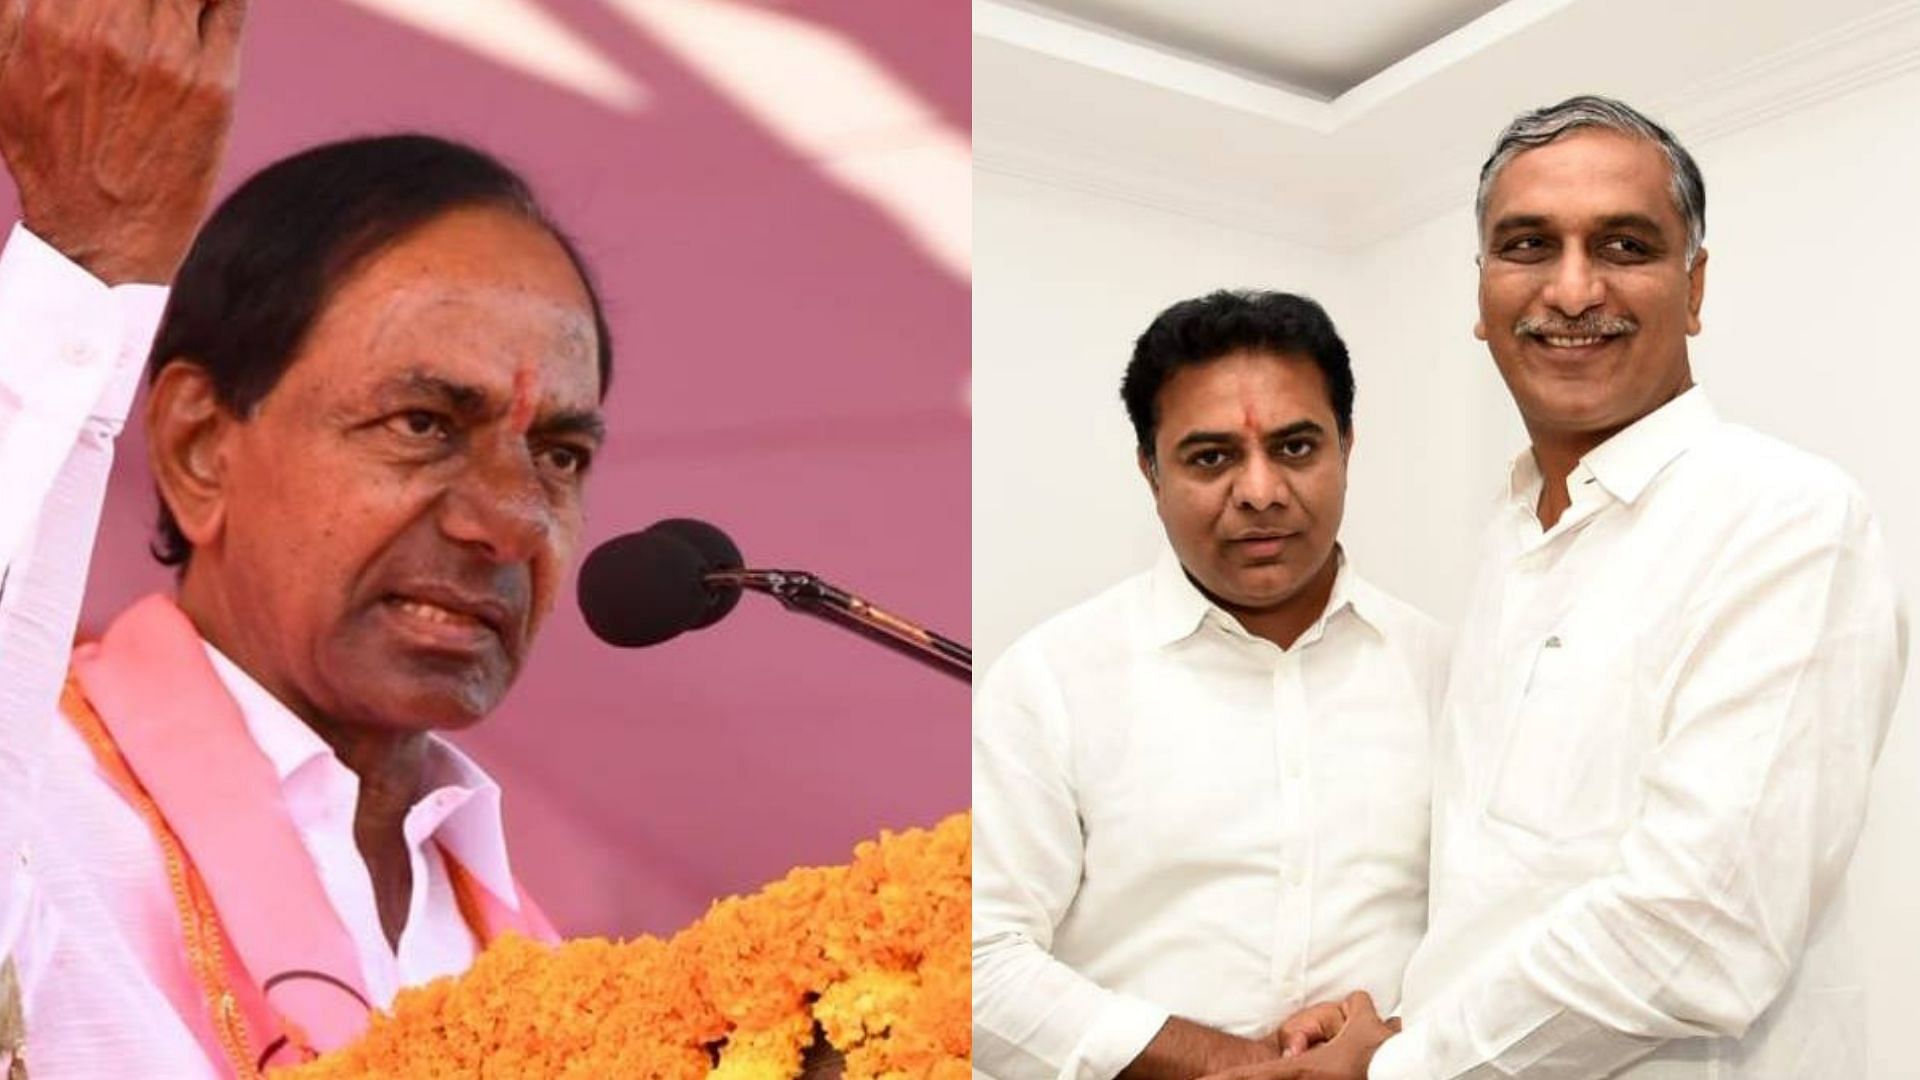 Observers say both KTR and Harish have been given the mammoth task of ensuring the TRS’ victory in the upcoming polls.